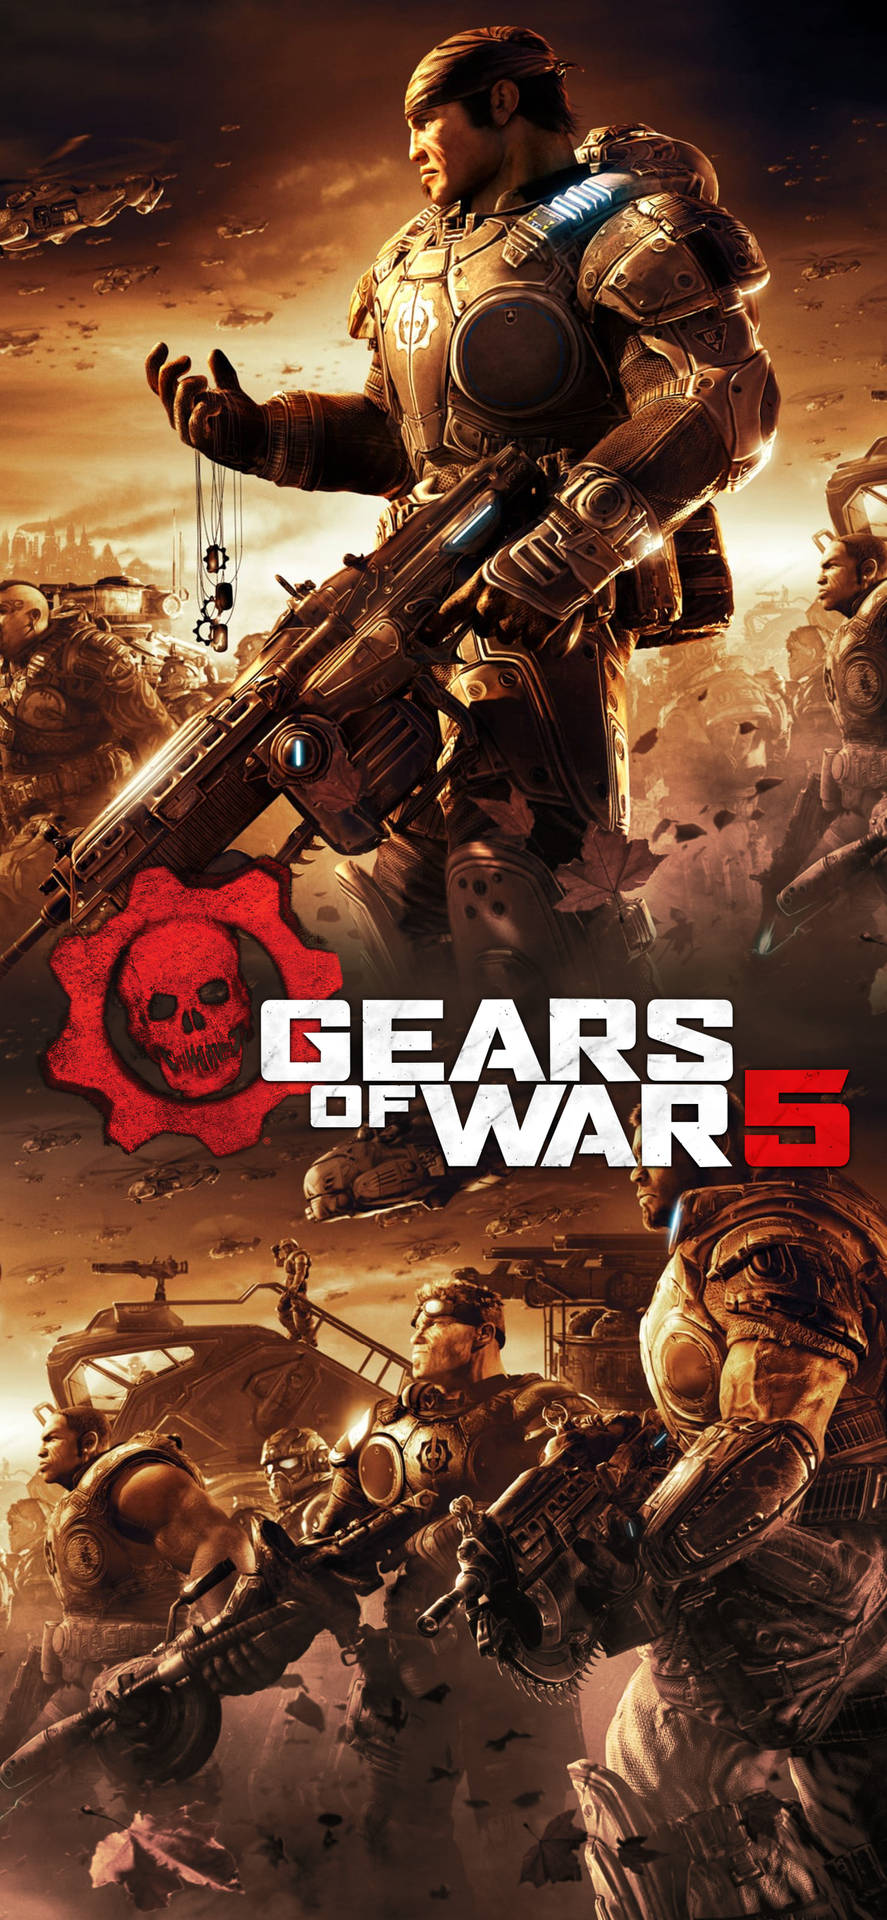 Free Gears 5 Iphone Wallpaper Downloads, [100+] Gears 5 Iphone Wallpapers  for FREE 